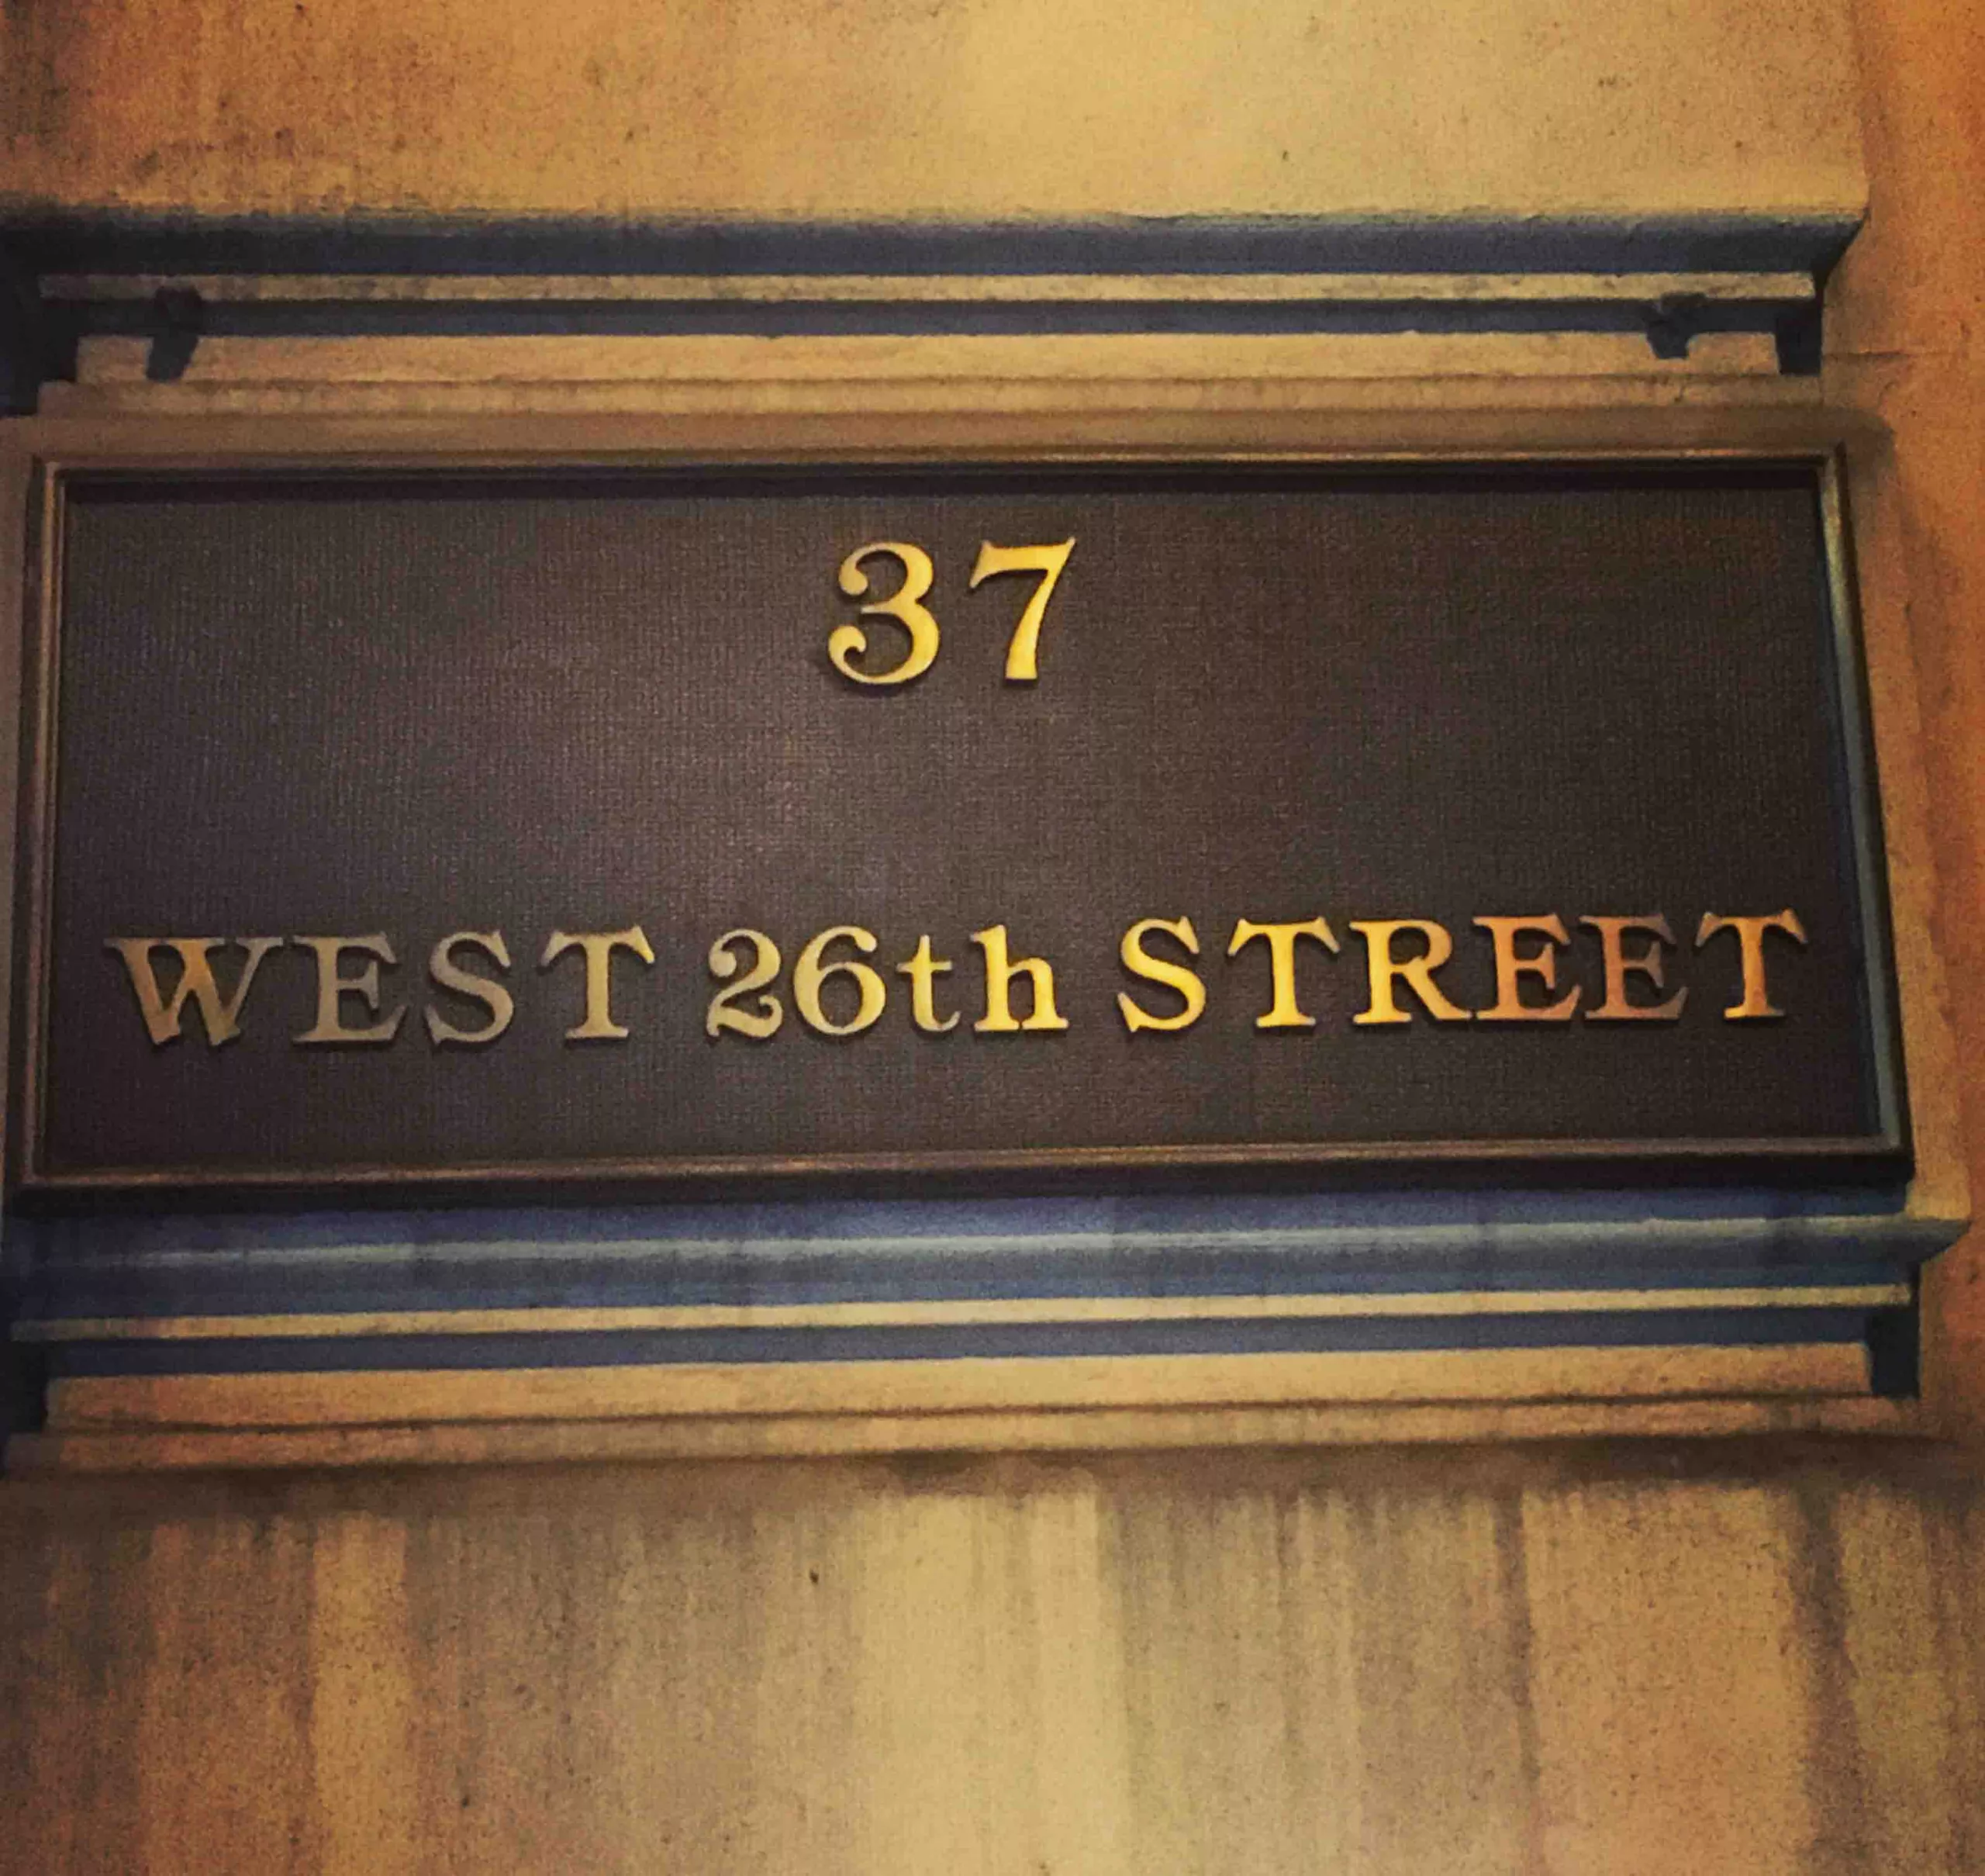 Elegant gold-lettered sign reading '37 WEST 26th STREET' mounted on a building facade.